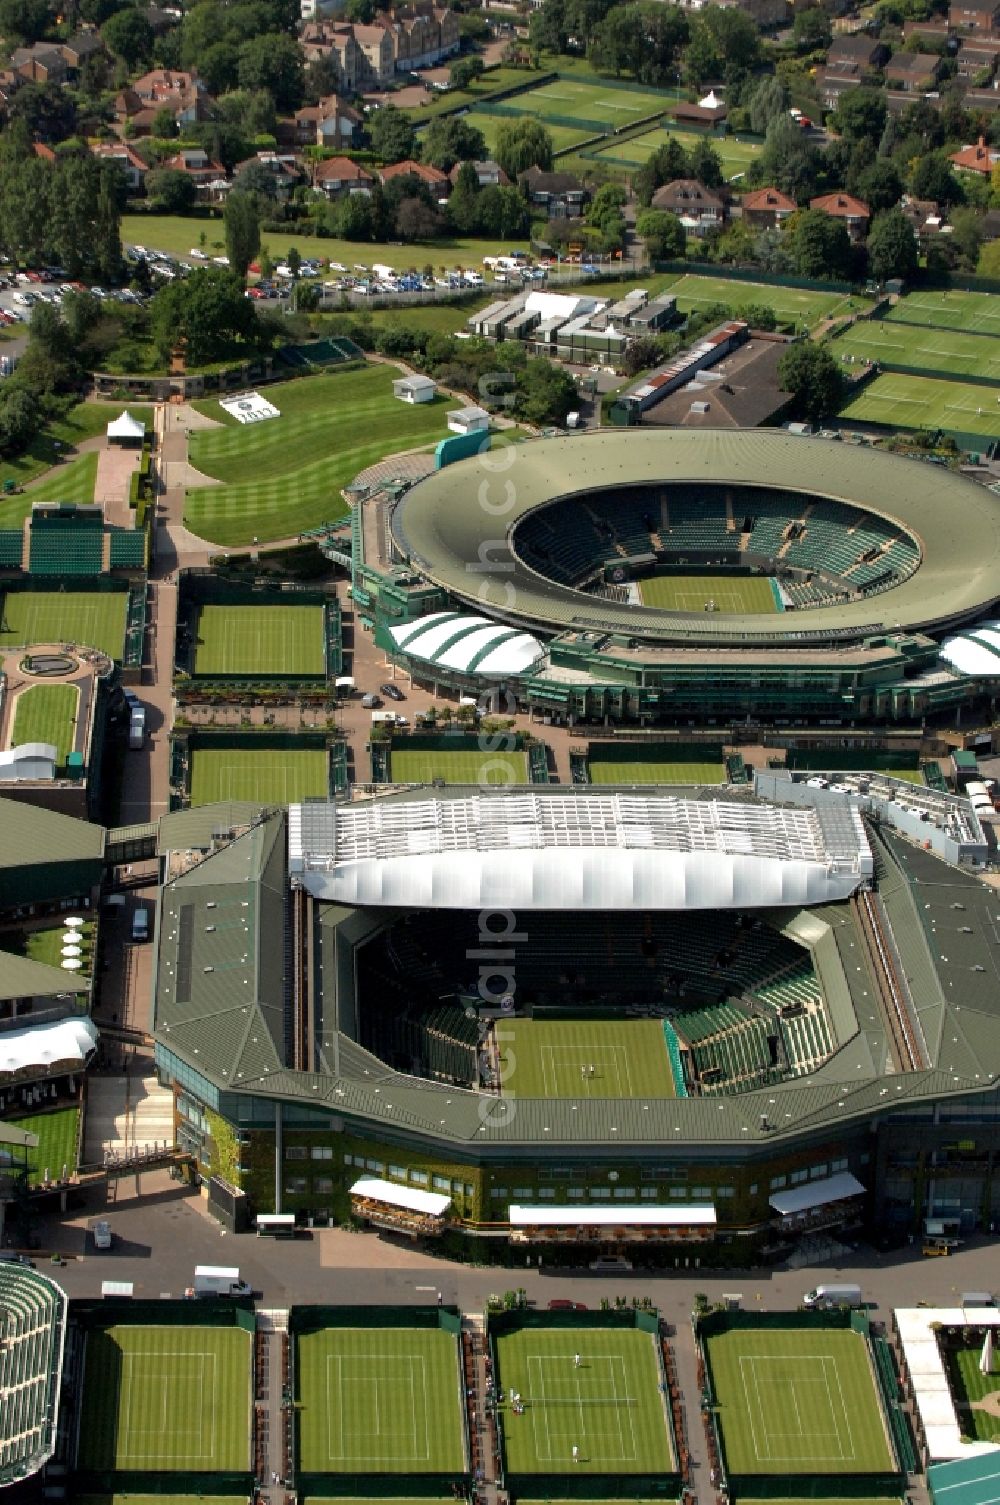 London from the bird's eye view: Venue of the tennis tournament the Championships, Wimbledon with the Court No.1 and the Centre Court and one of the Olympic and Paralympic venues for the 2012 Games in London in England, Great Britain